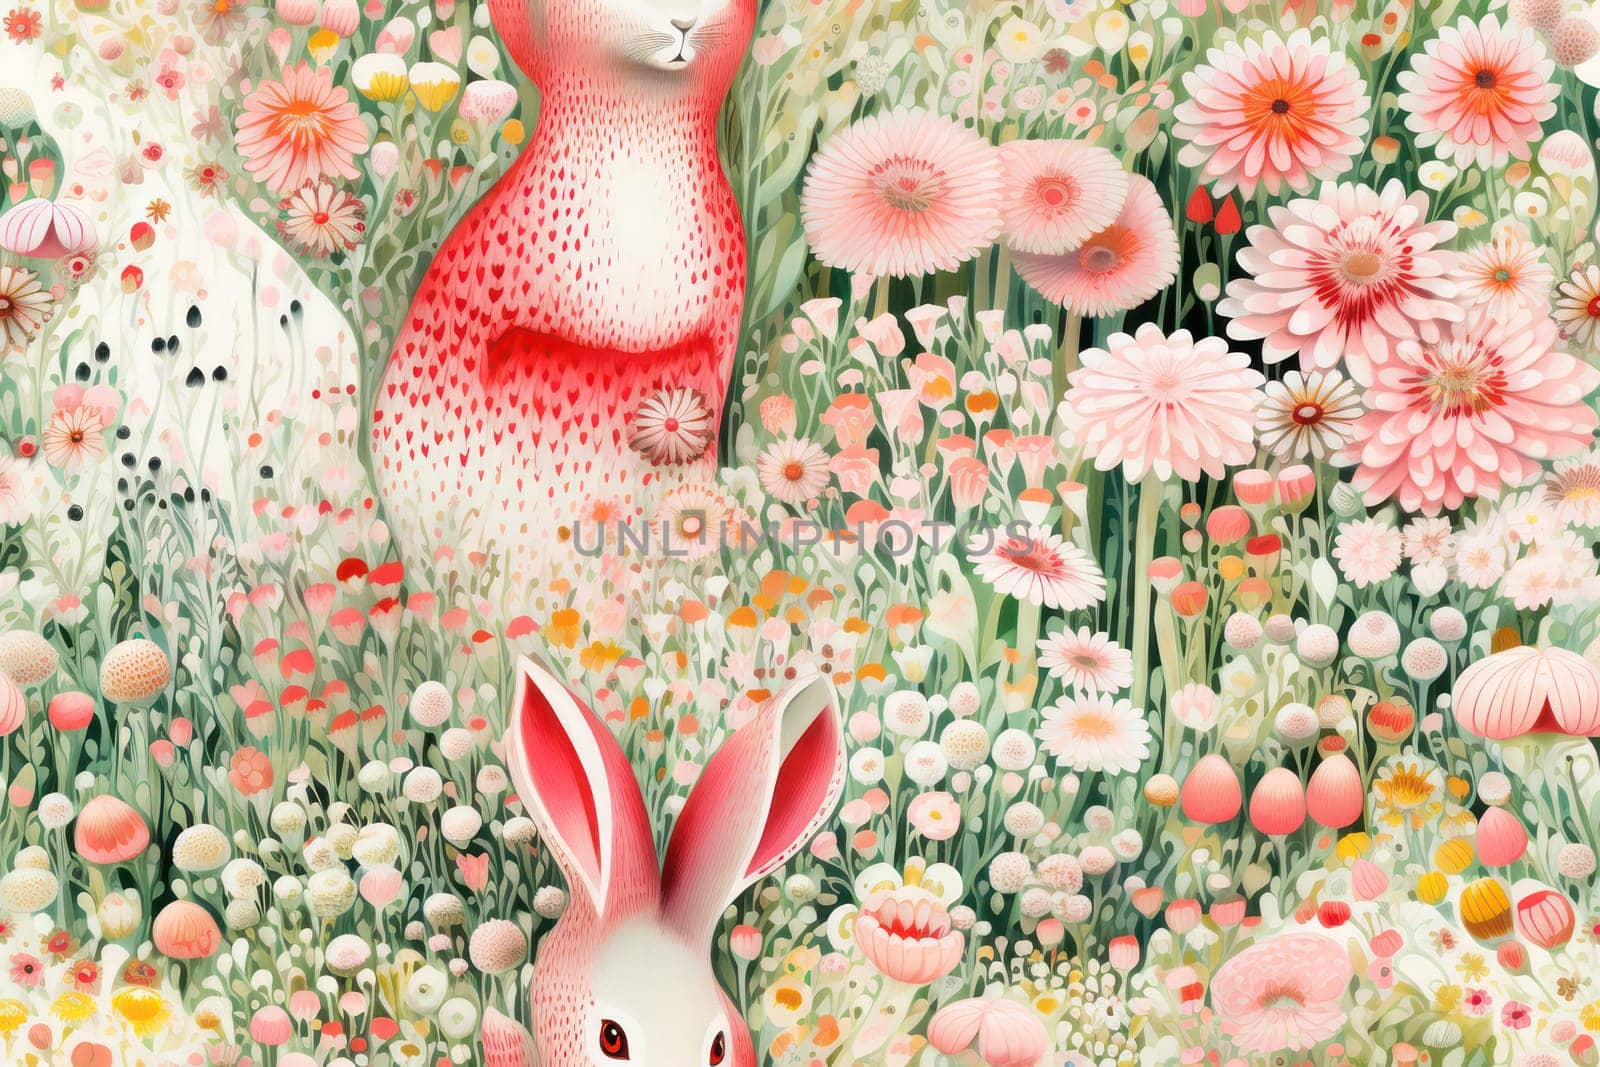 Whimsical Rabbit's Delight: A Charming, Cute Floral Bunny Cartoon - a Seamless Pattern Illustration with Happy, Vintage, and Romantic Vibes. by Vichizh